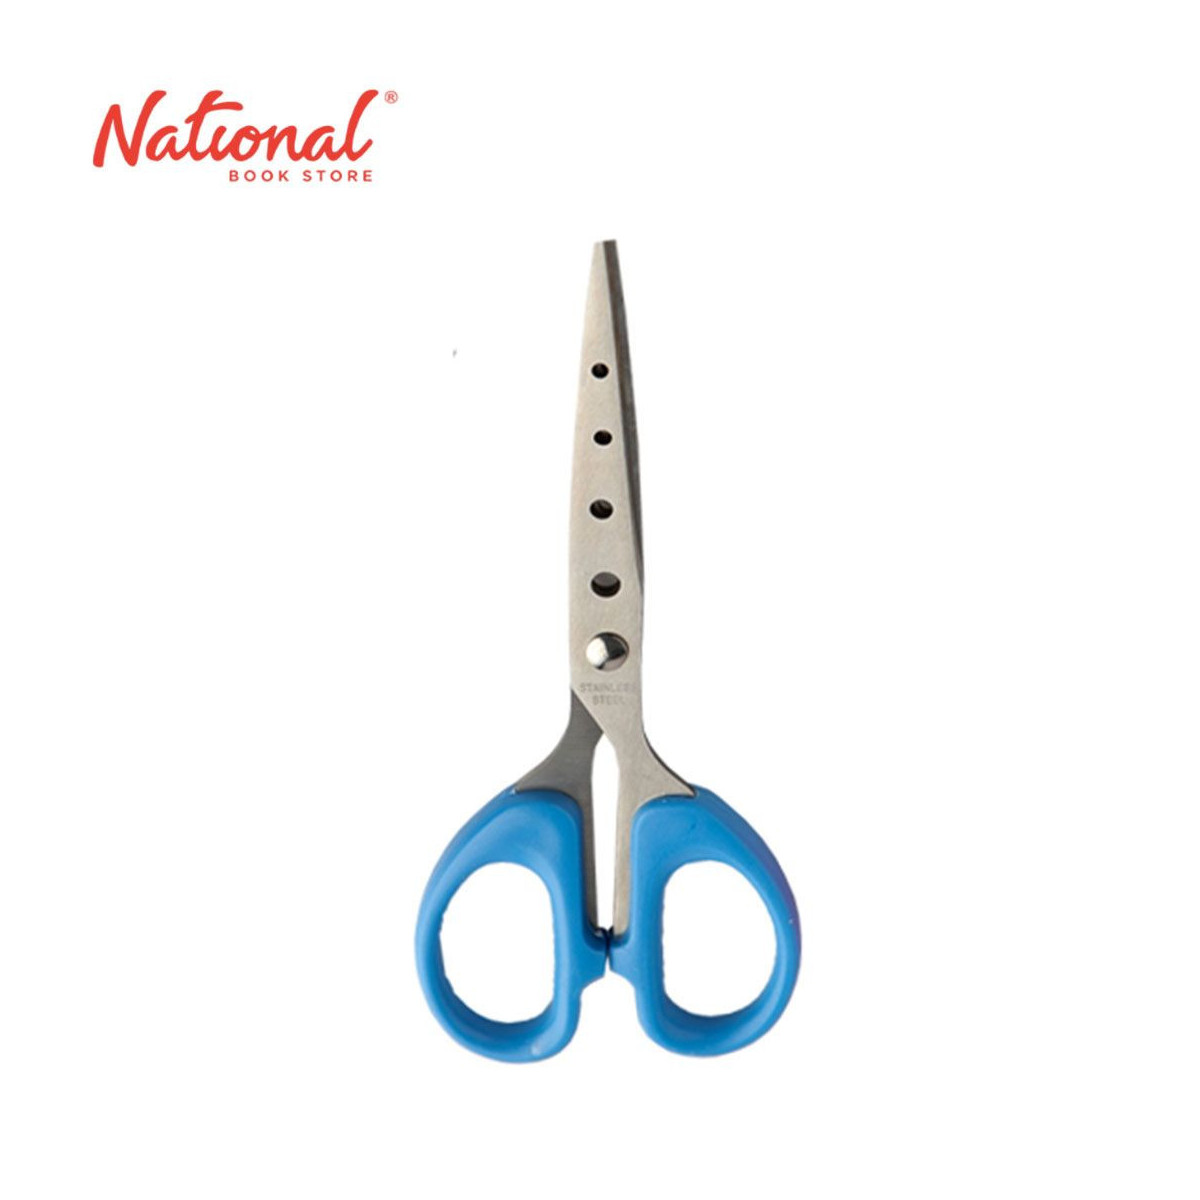 https://www.nationalbookstore.com/119560-thickbox_default/long-life-multi-purpose-scissors-pointed-stainless-with-holes-blue-6-inches-s3283.jpg